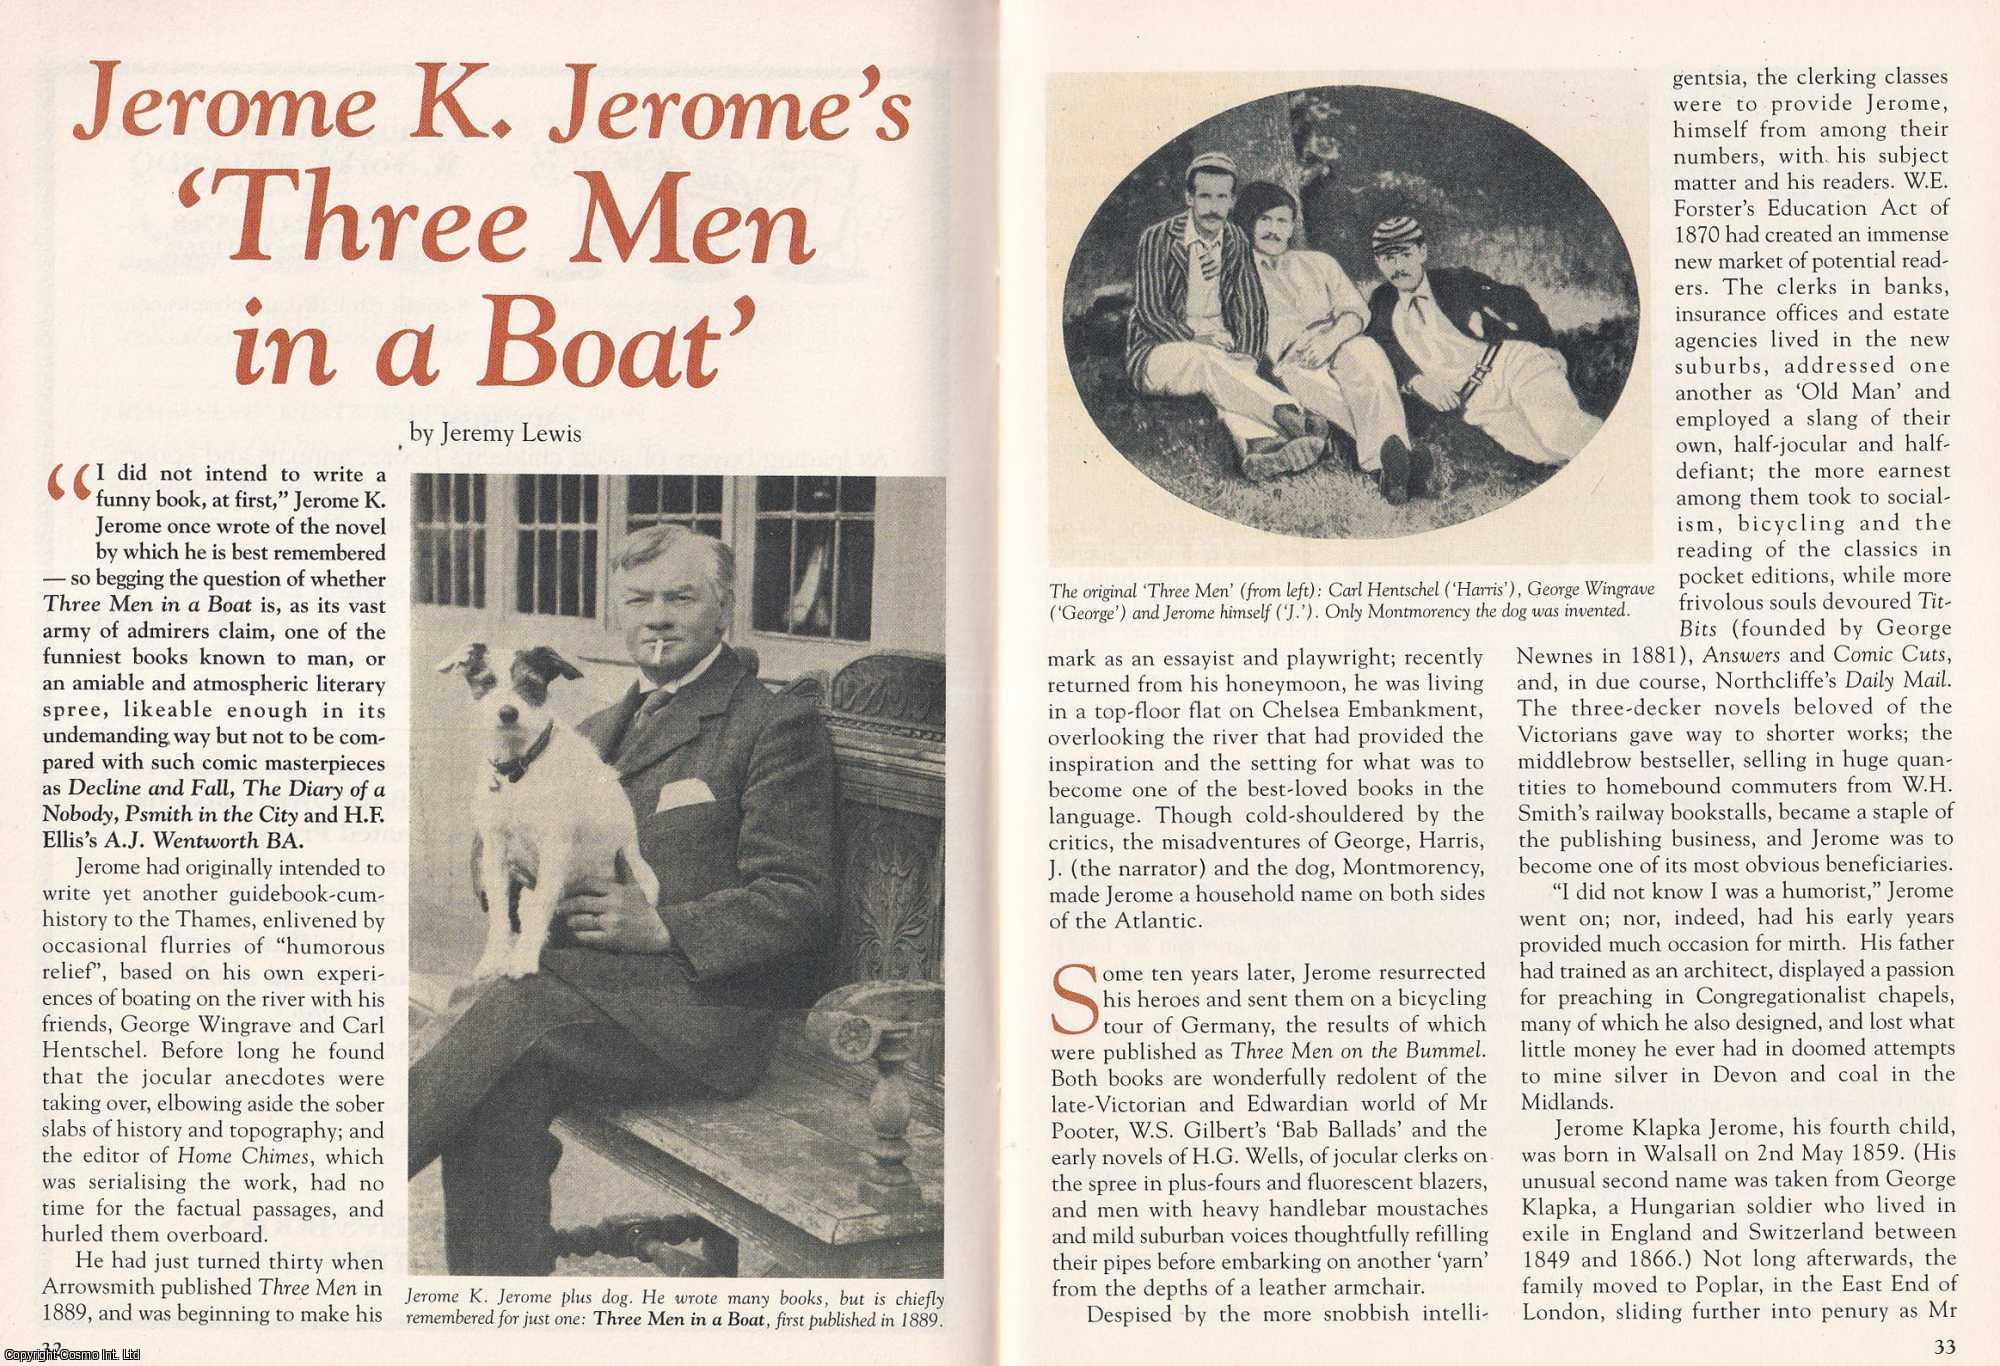 Jeremy Lewis - Jerome K. Jerome's Three Men in a Boat. This is an original article separated from an issue of The Book & Magazine Collector publication, 2004.